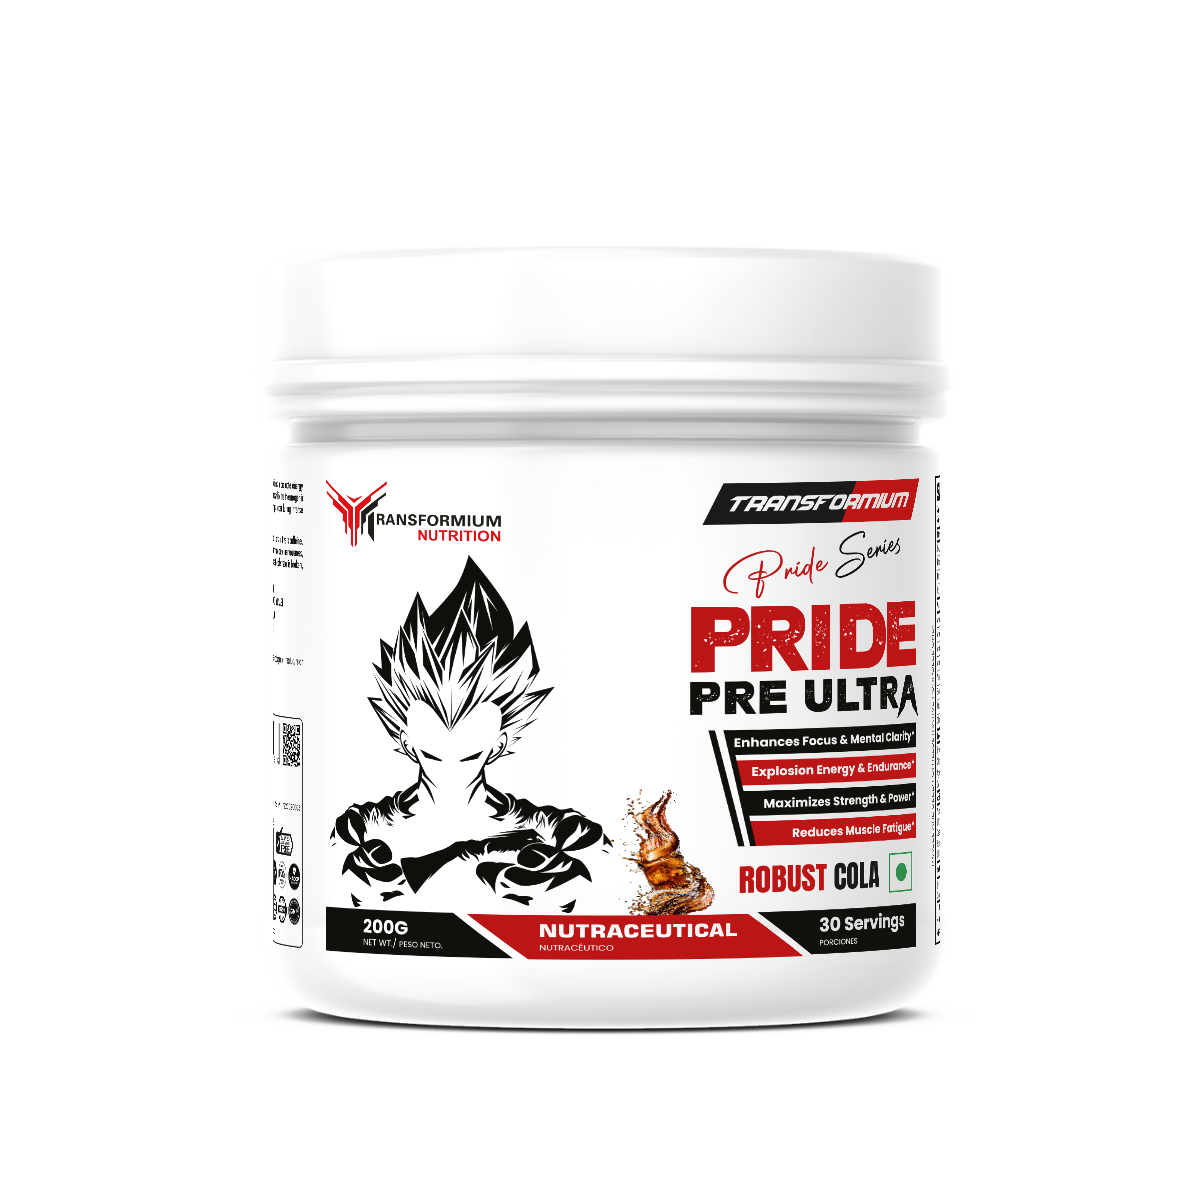 Pride Pre Ultra (Ultra Strong Pre-Workout)